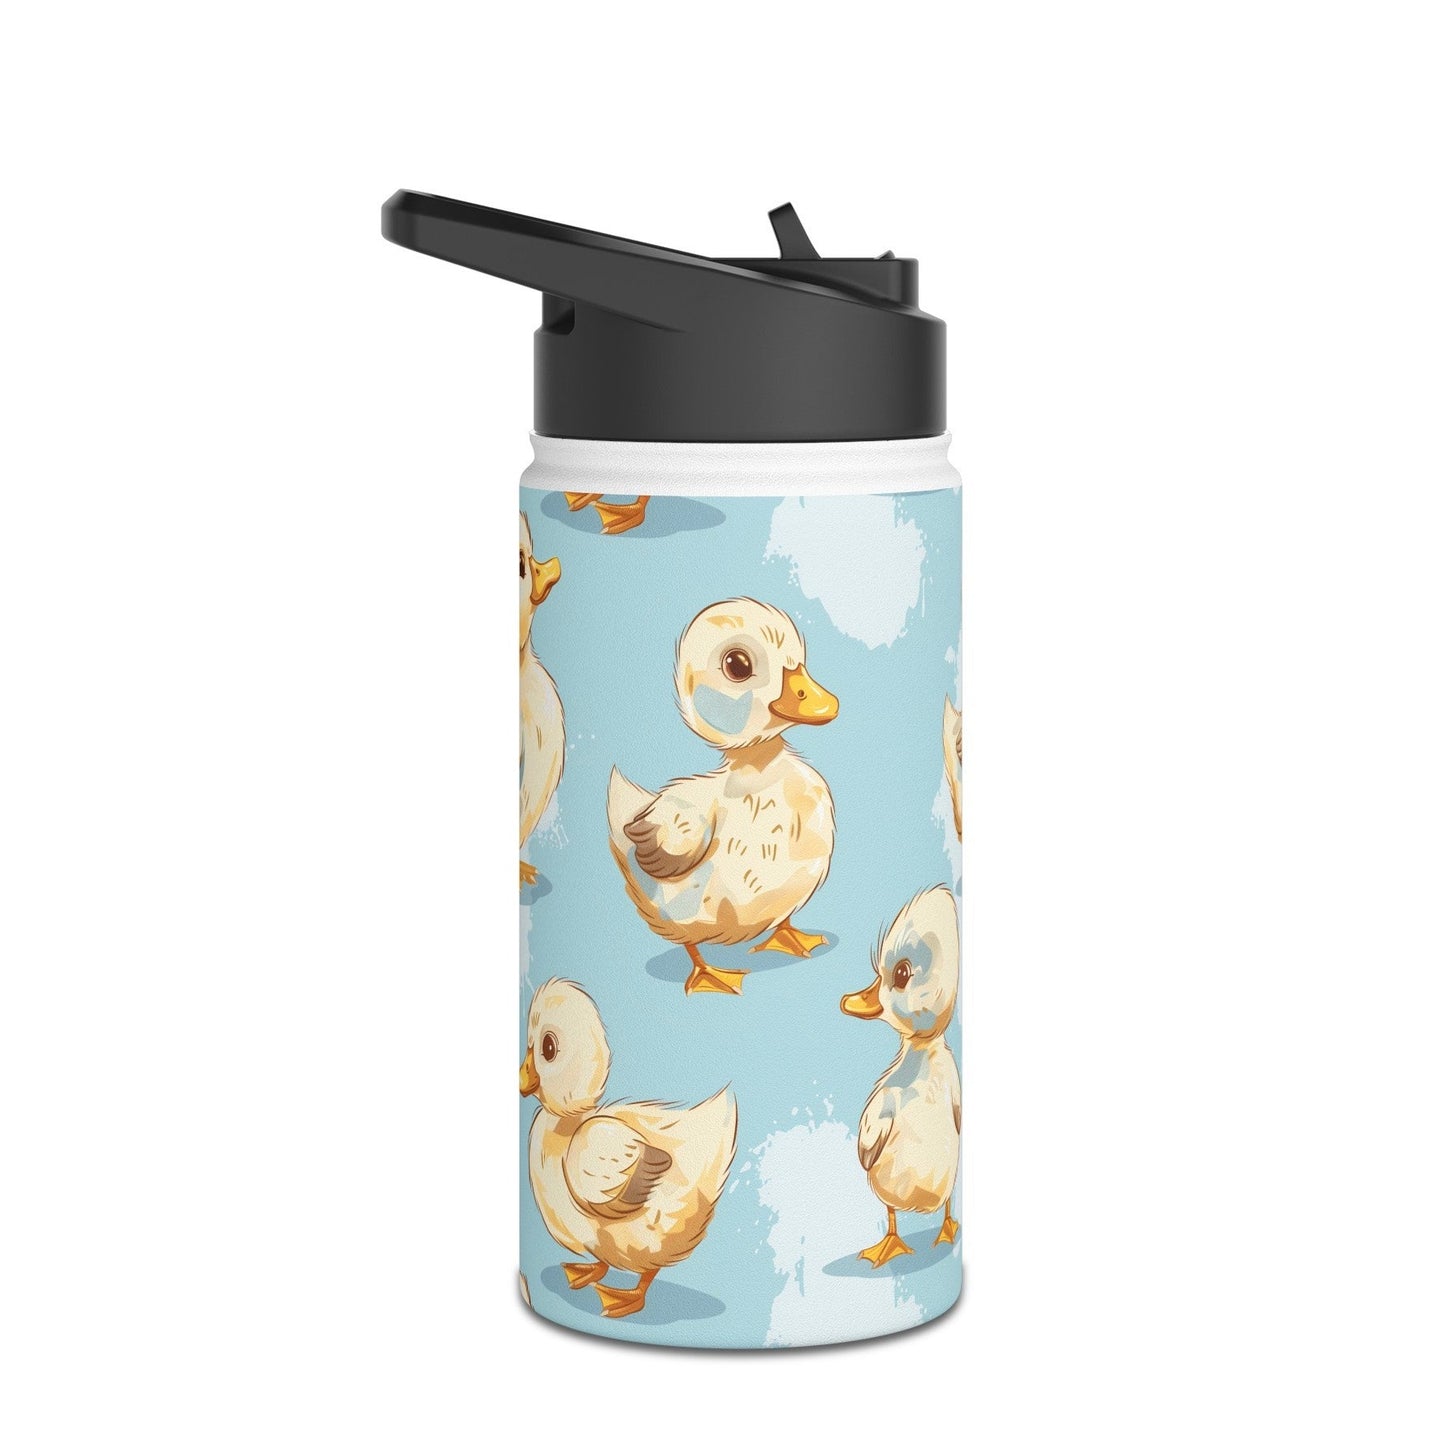 Insulated Water Bottle, 12oz, Cute Baby Ducklings - Double Walled Stainless Steel Thermos, Keeps Drinks Hot or Cold